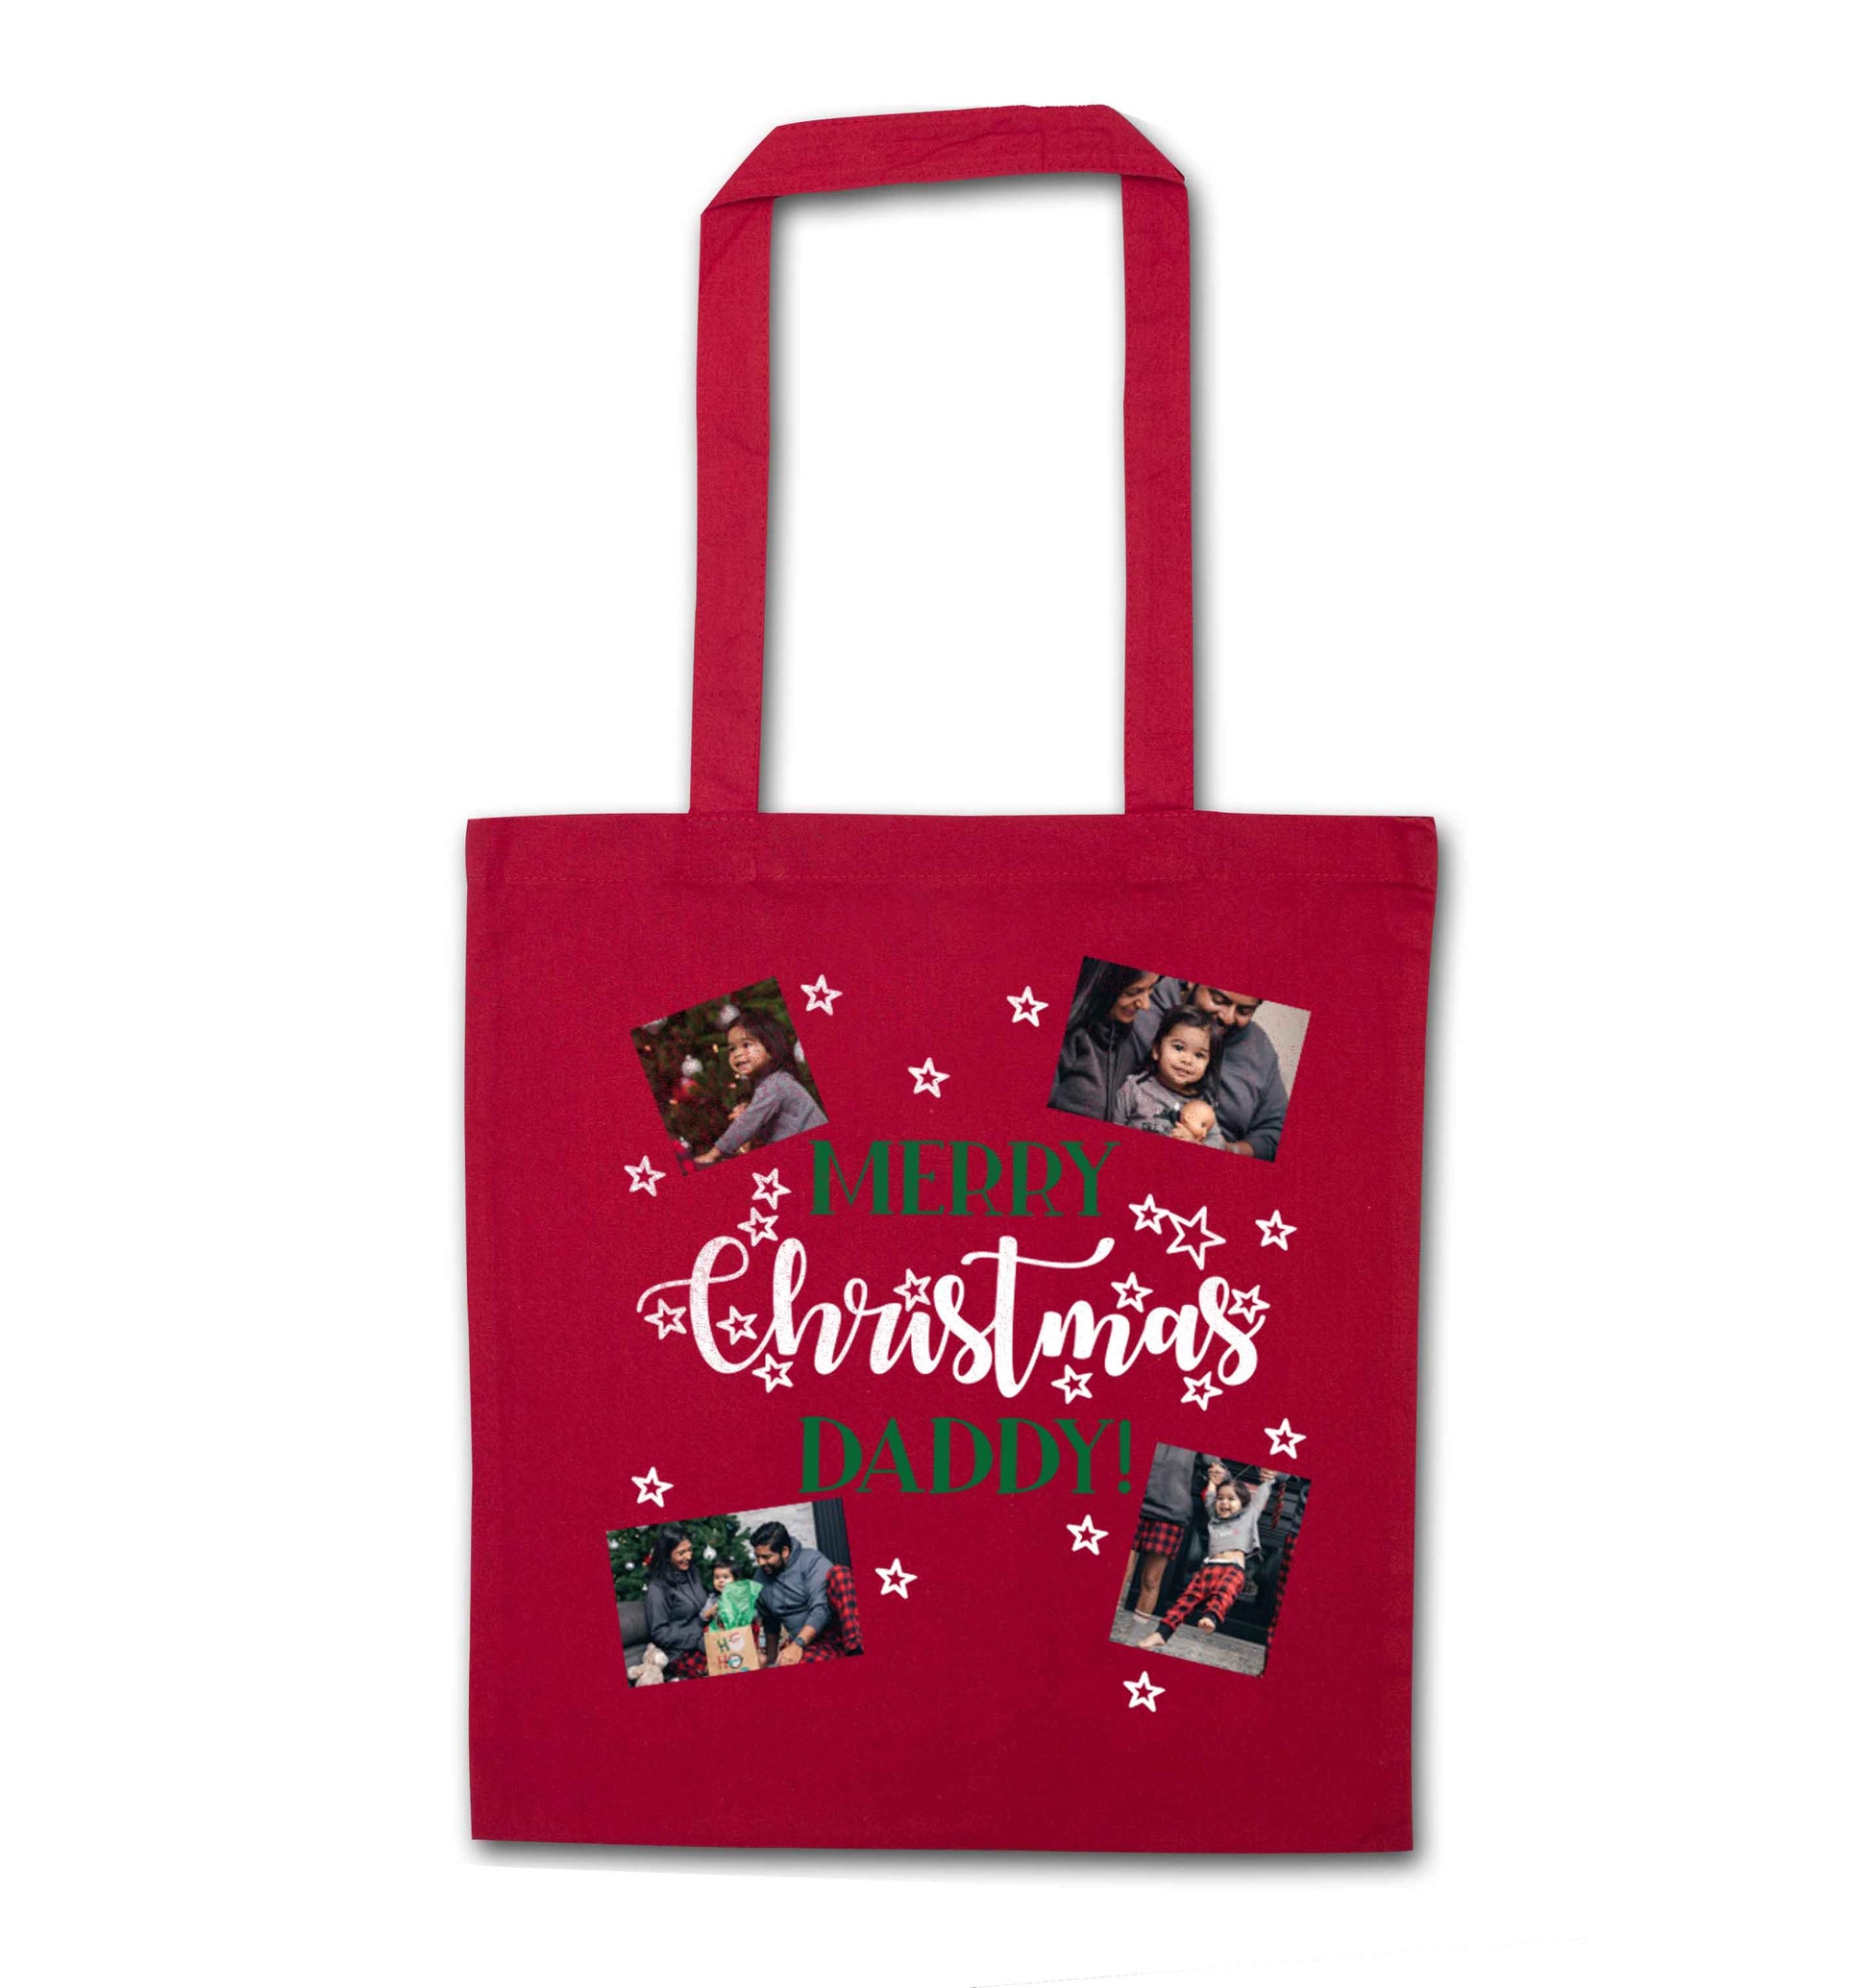 Merry Christmas daddy red tote bag